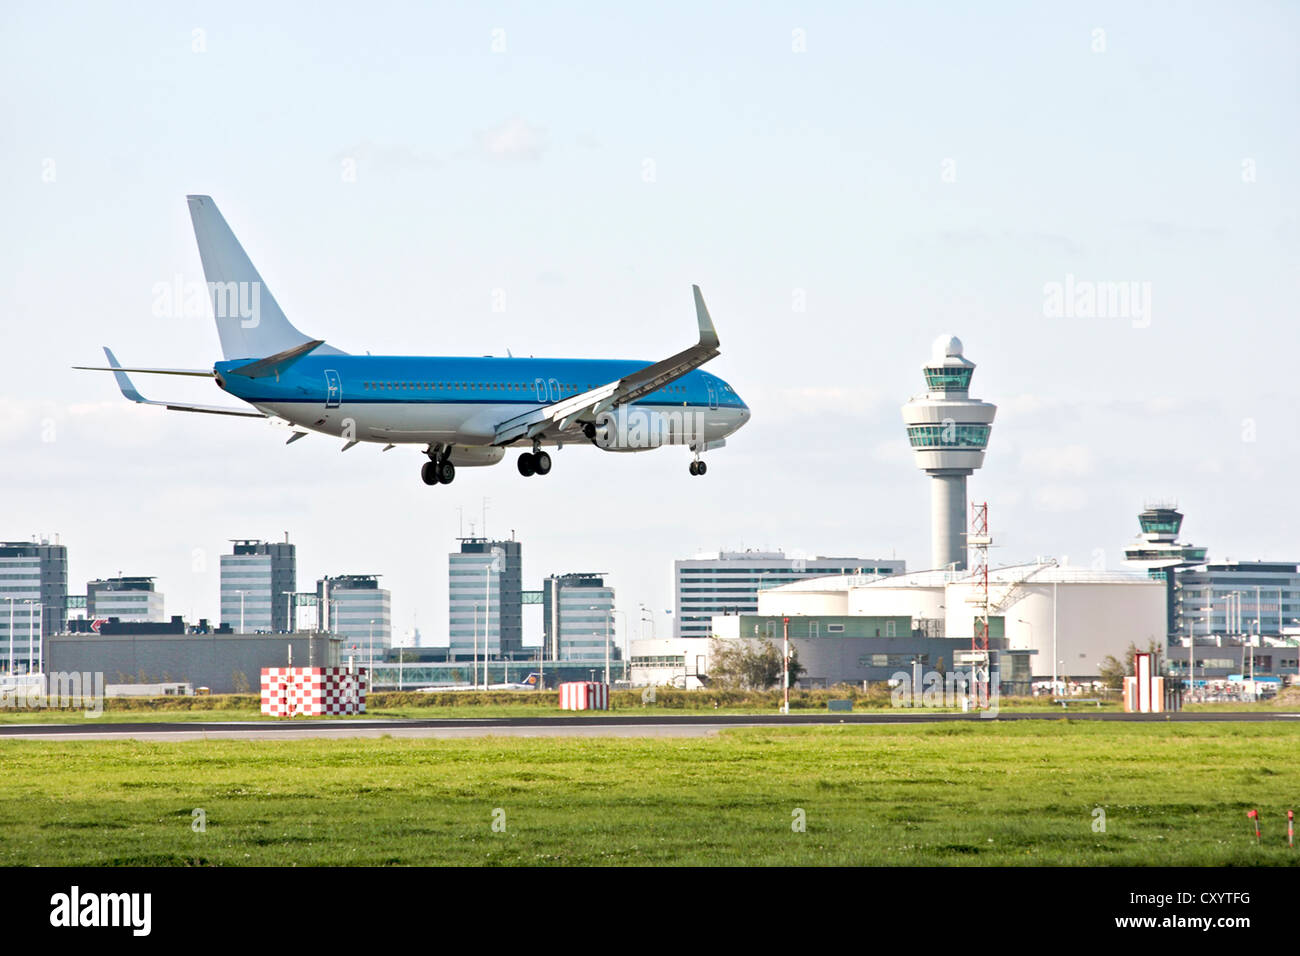 Airplane landing at Schiphol airport in the Netherlands Stock Photo